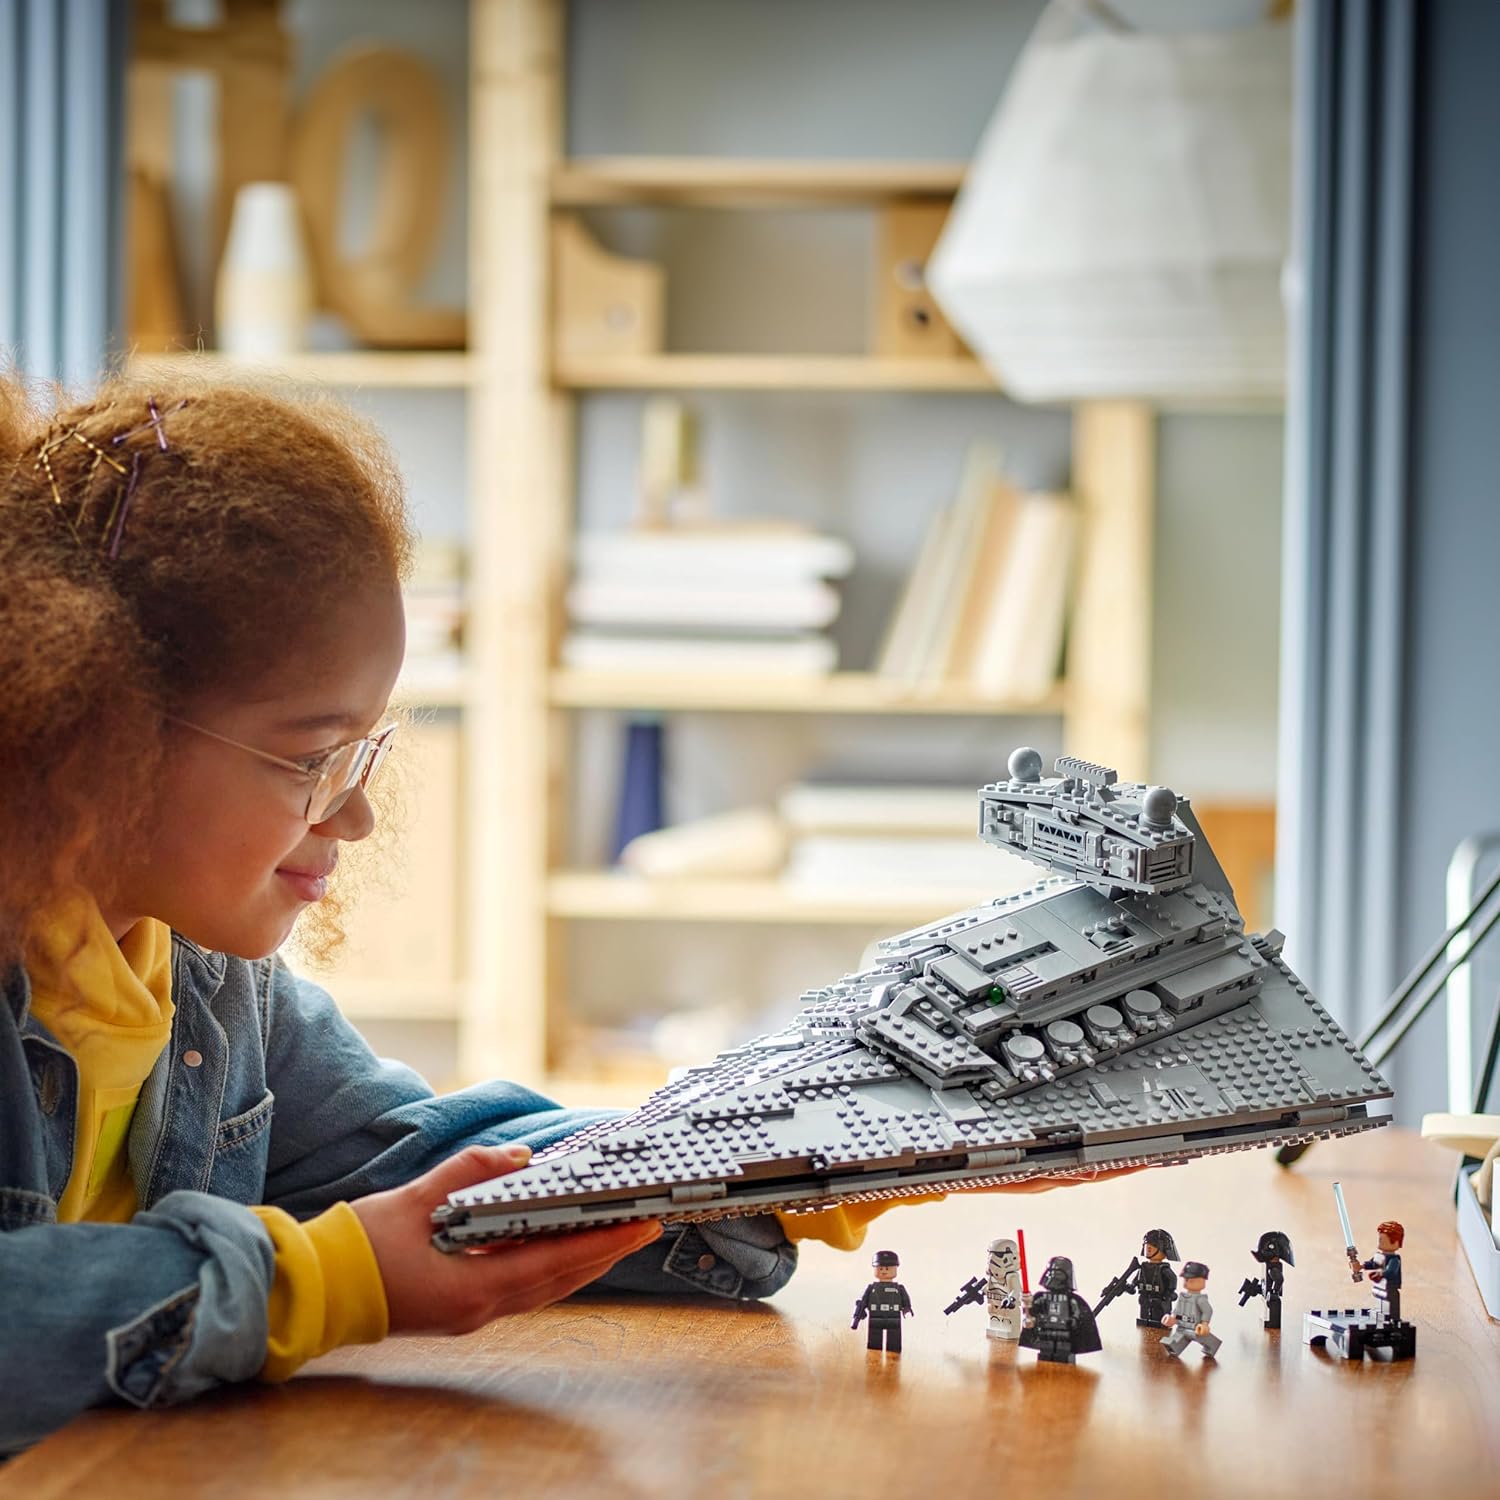 a young girl ،lds a completed Lego Star Destroyer s،wing the iconic Star Wars ،e،p in Lego form. Seven minifigure characters are on a desk underneath the toy.